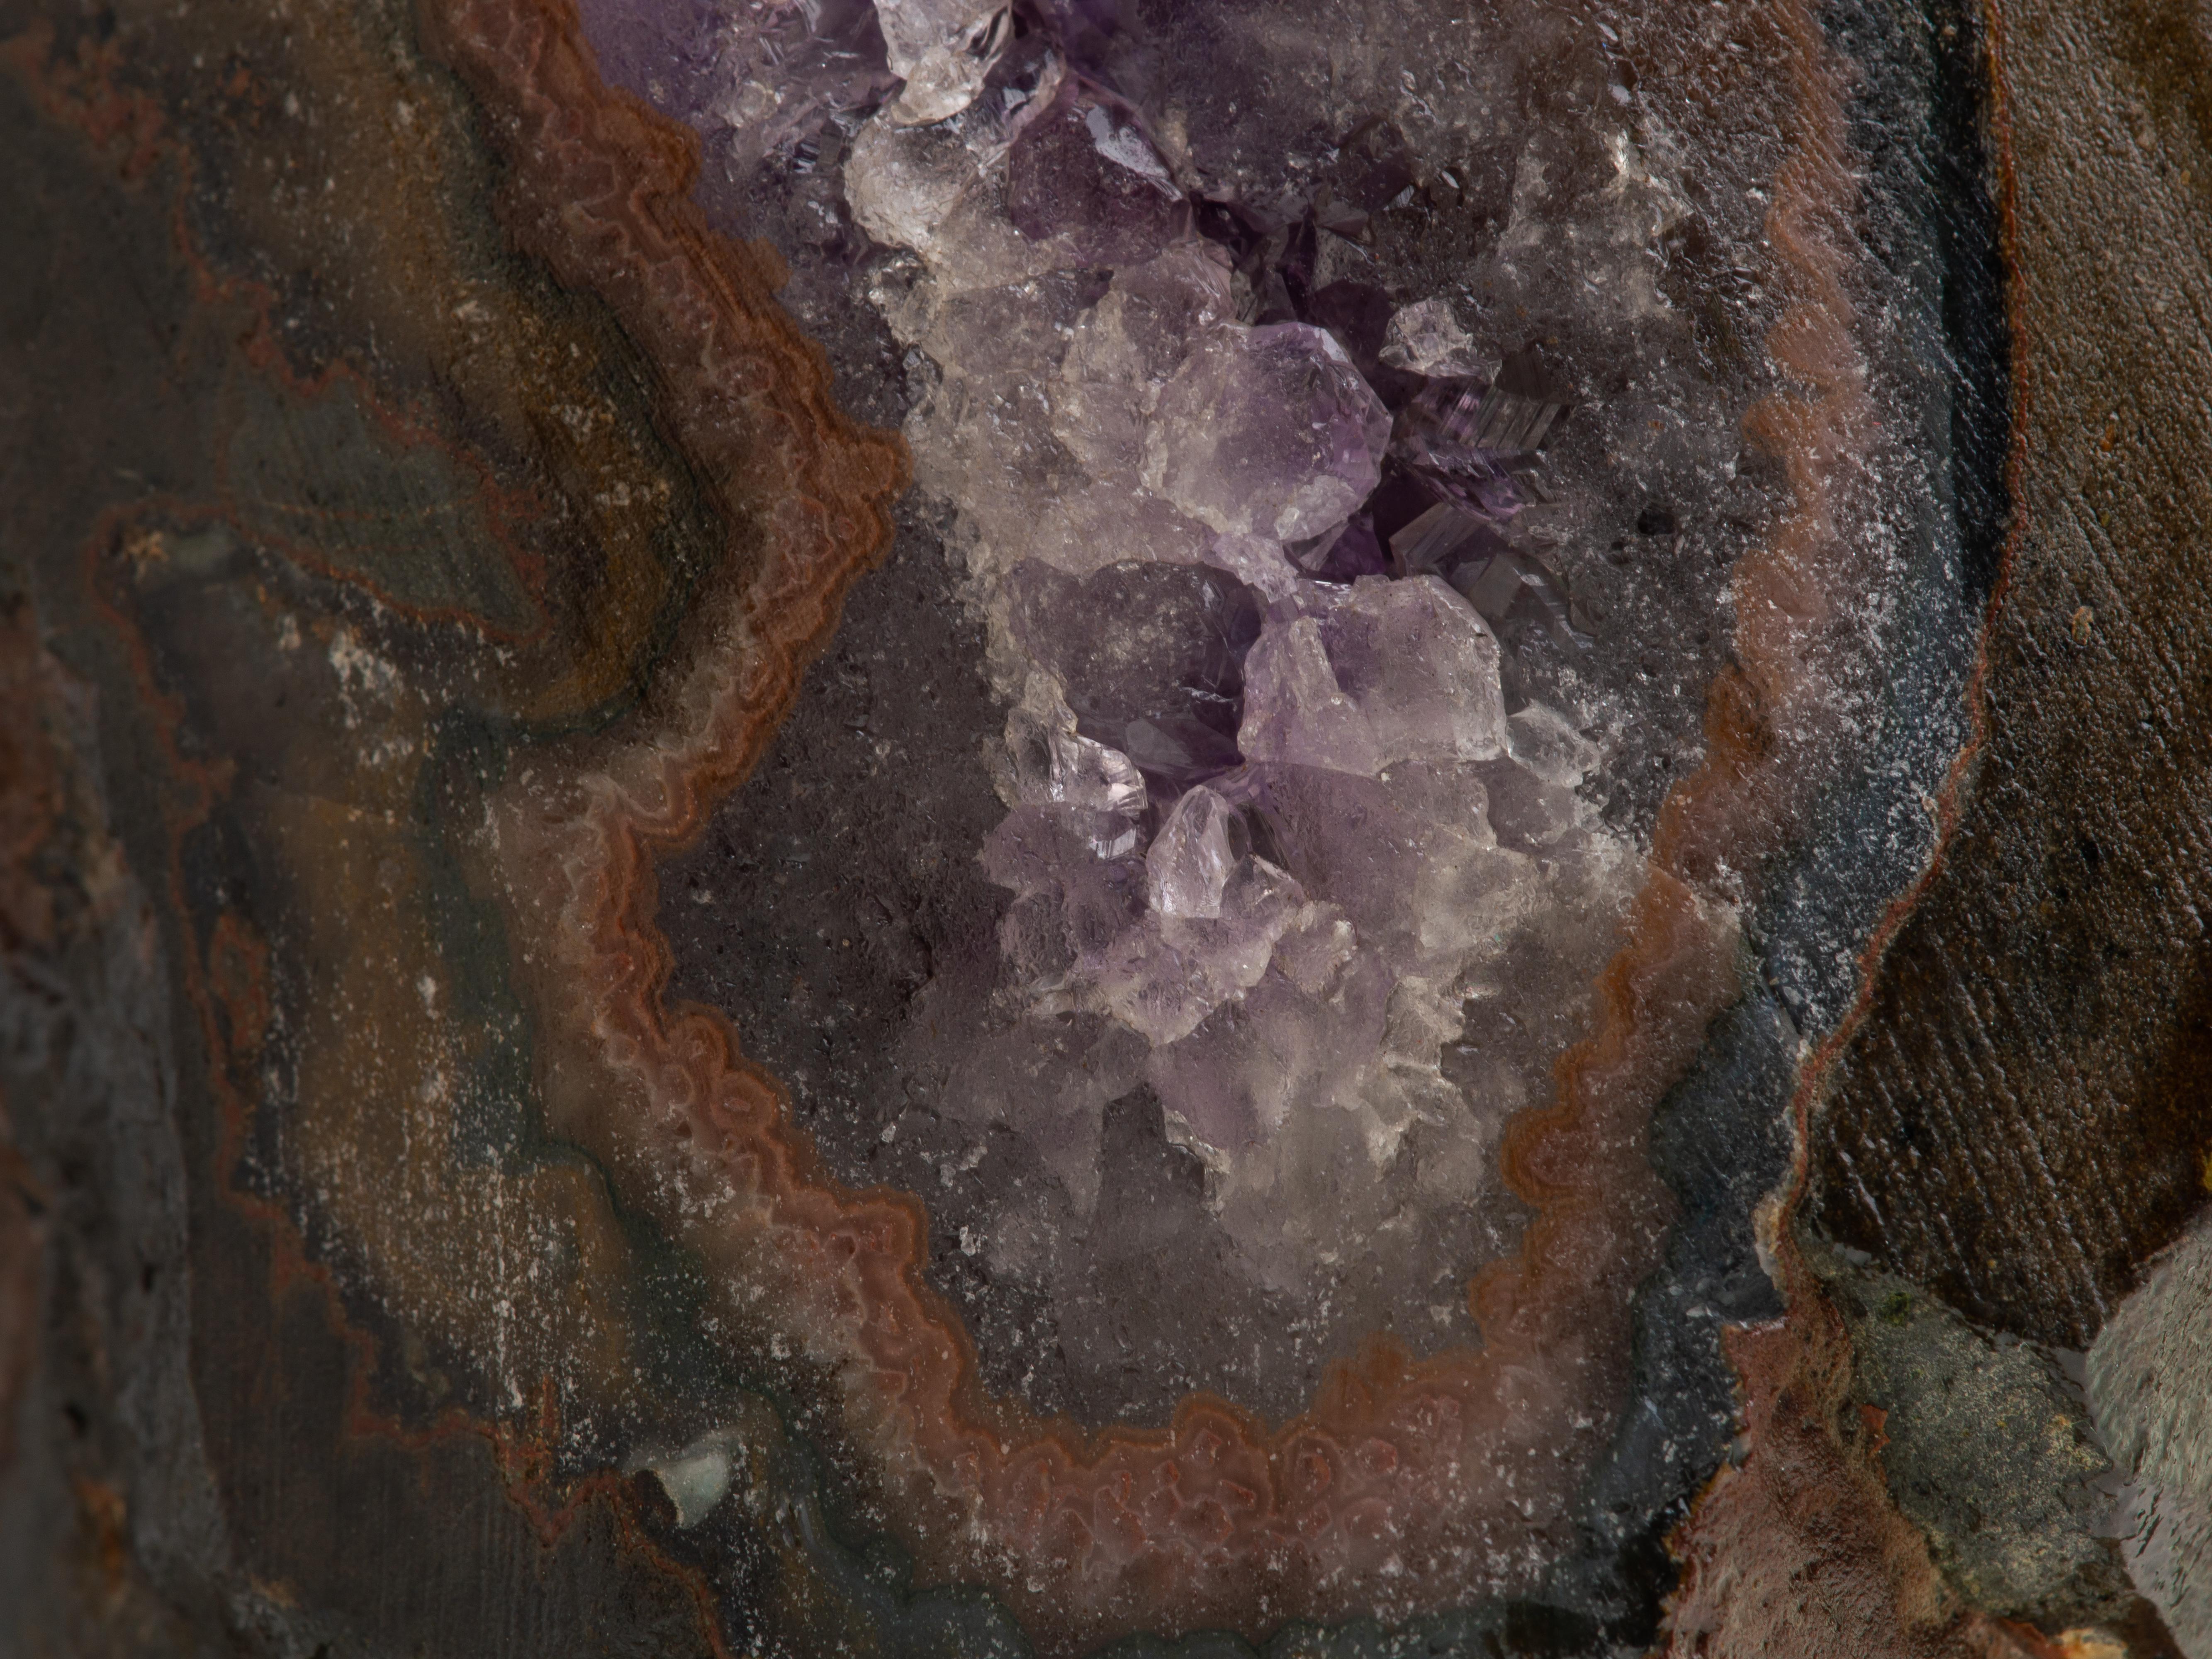 Angel Shaped Amethyst Crystals and Calcite mineral formation 7